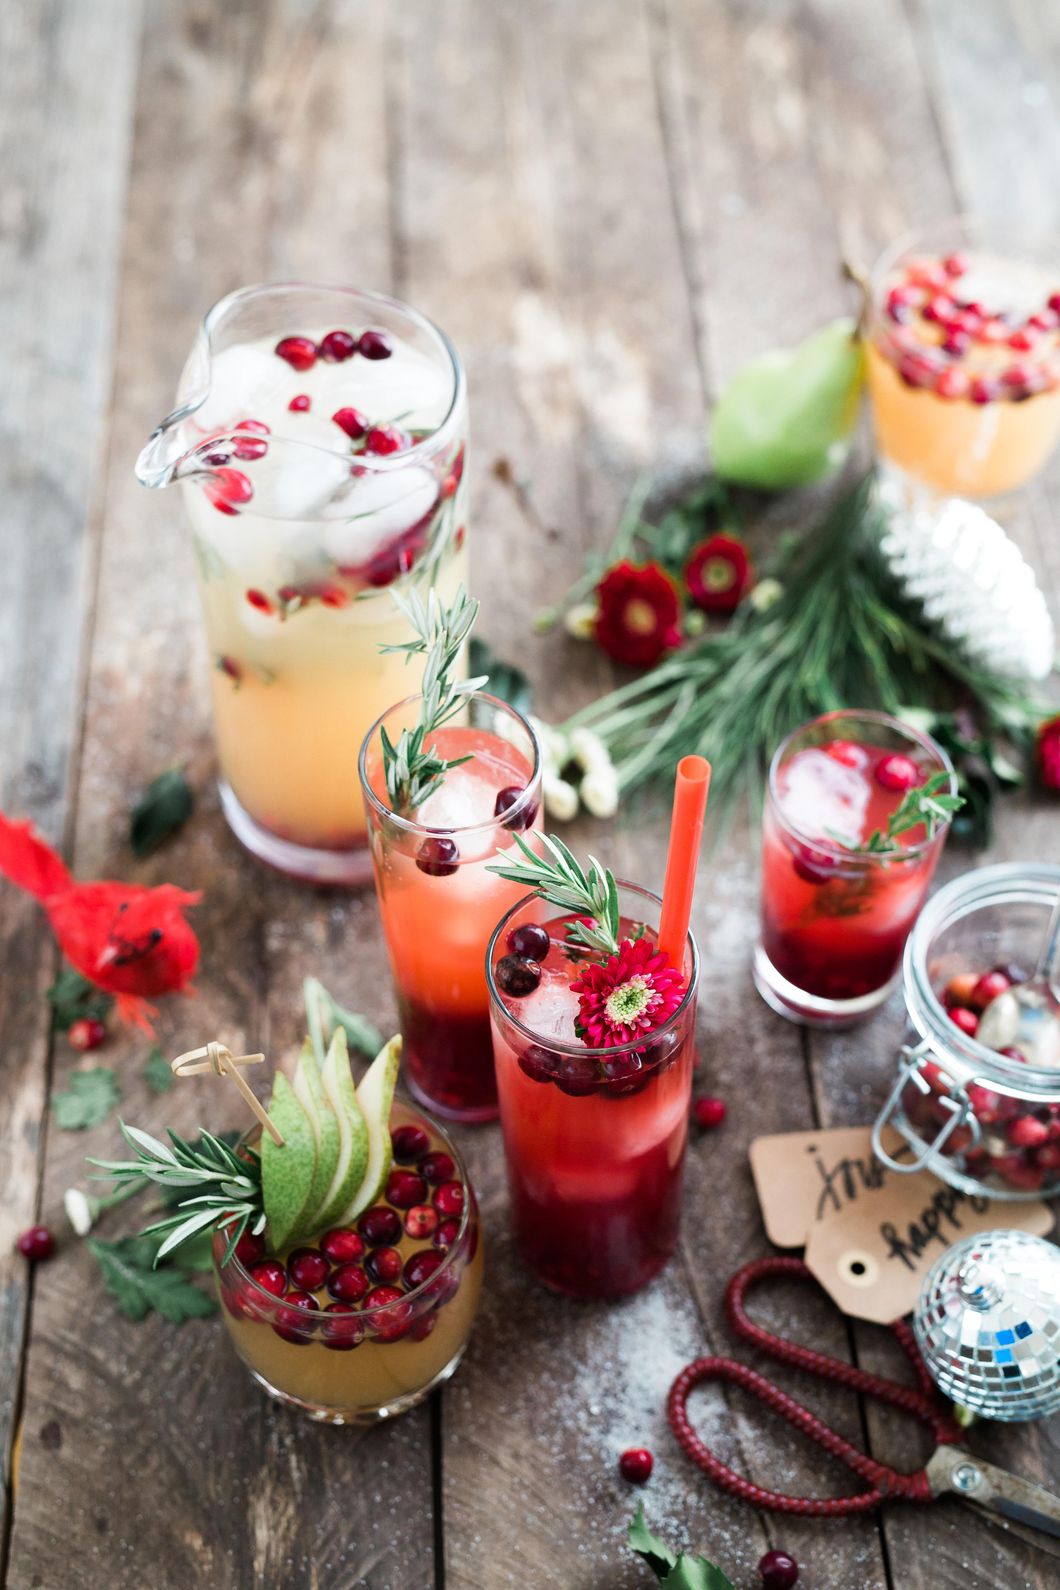 Alcoholic and Non-alcoholic Drinks You Need To Try This Holiday Season